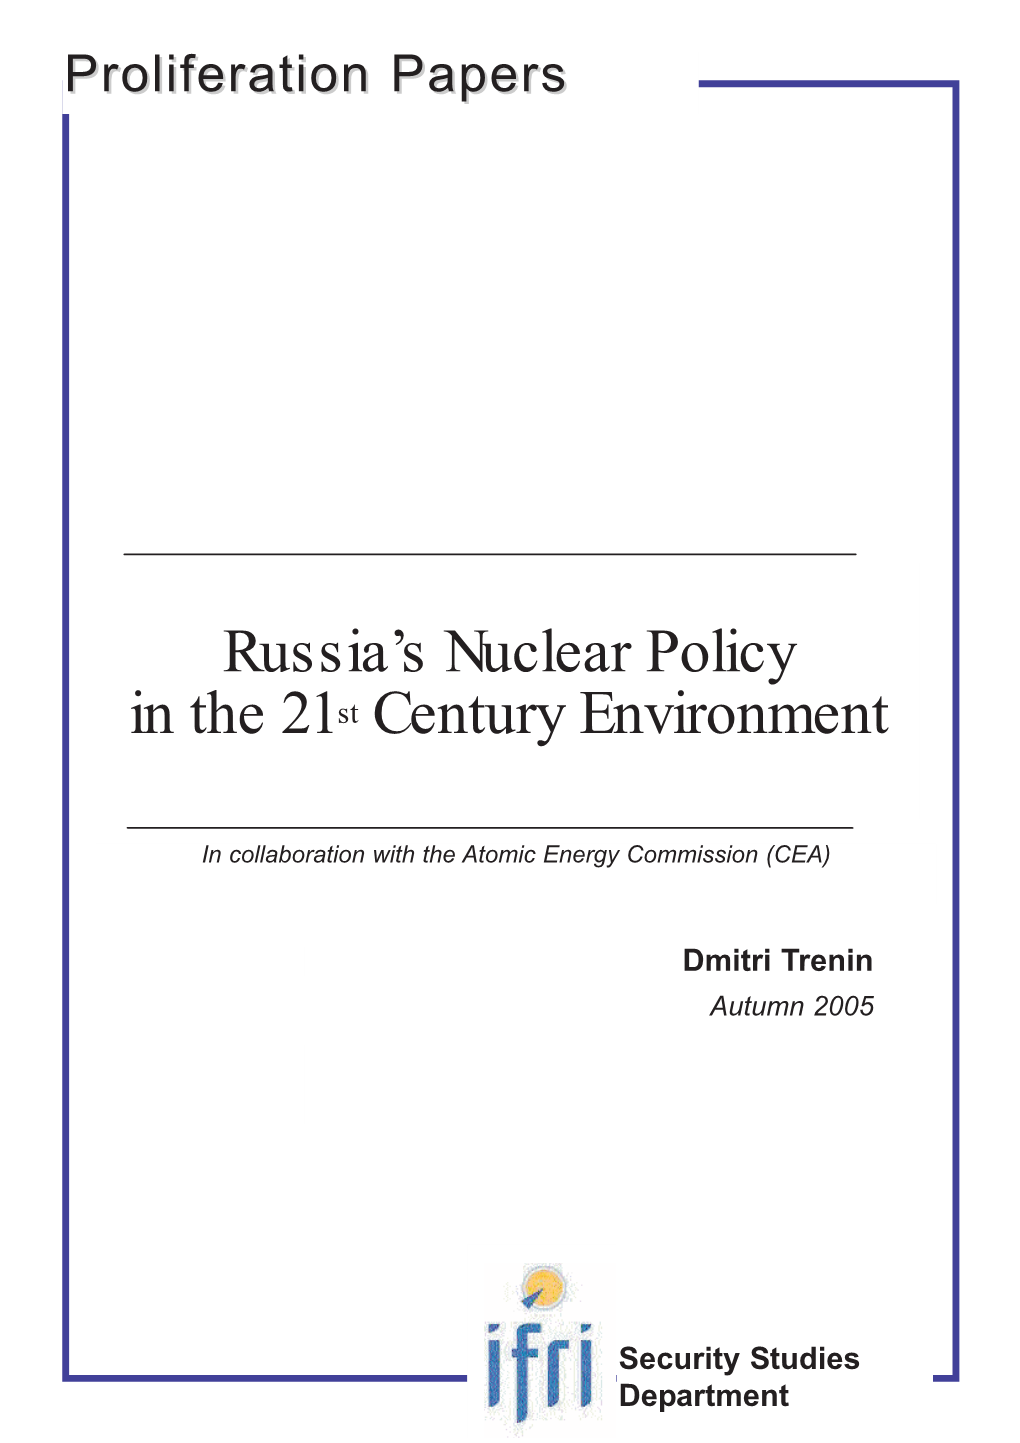 Russia's Nuclear Policy in the 21St Century Environment